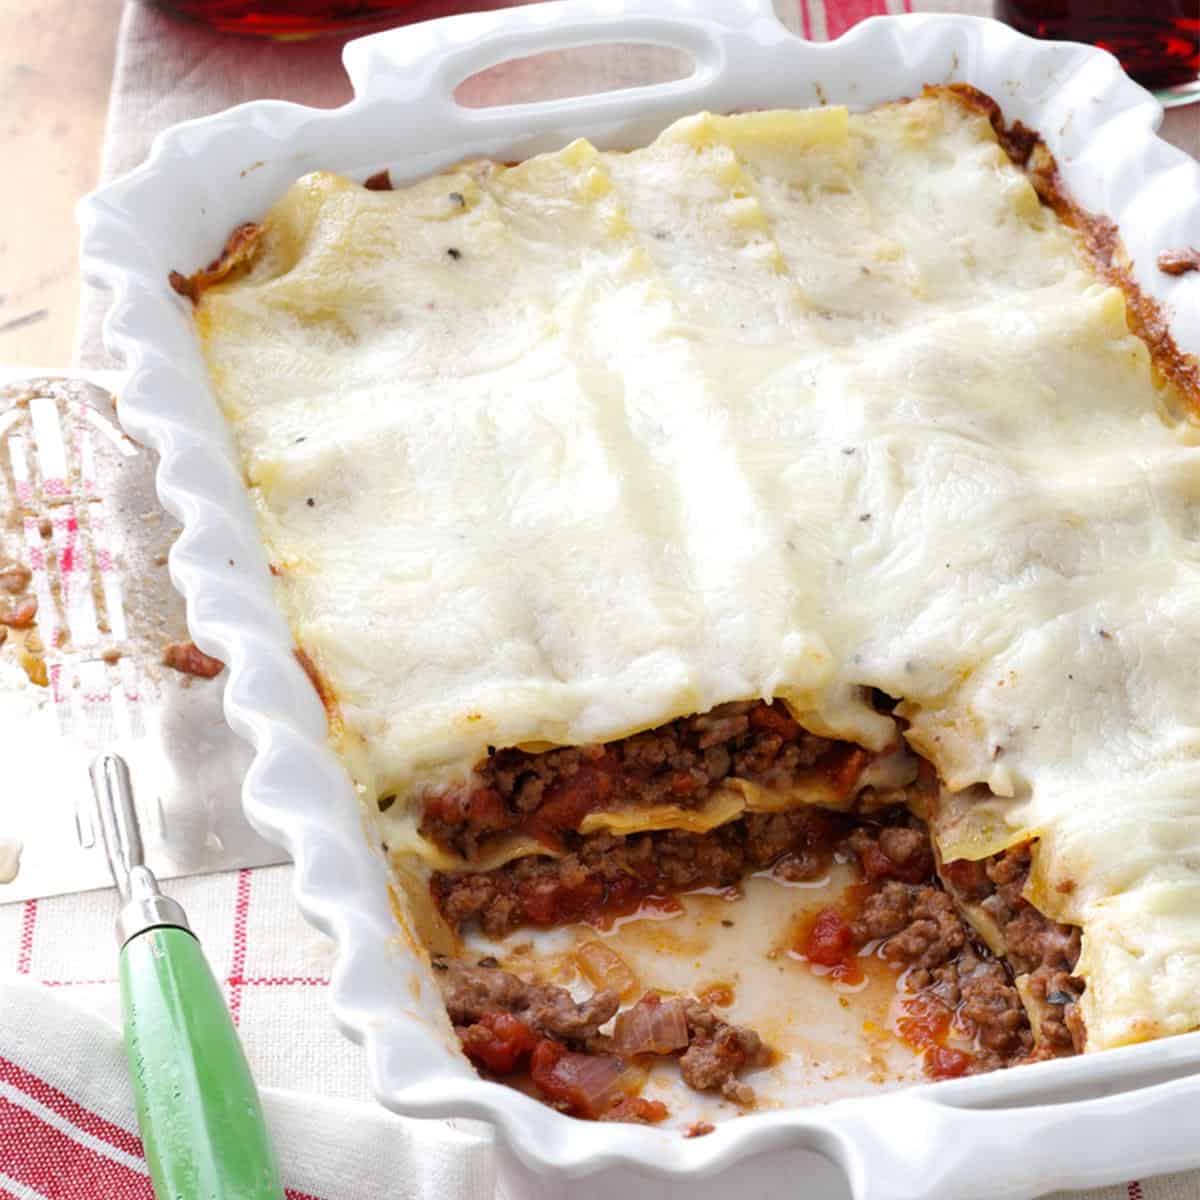 Lasagna with white sauce